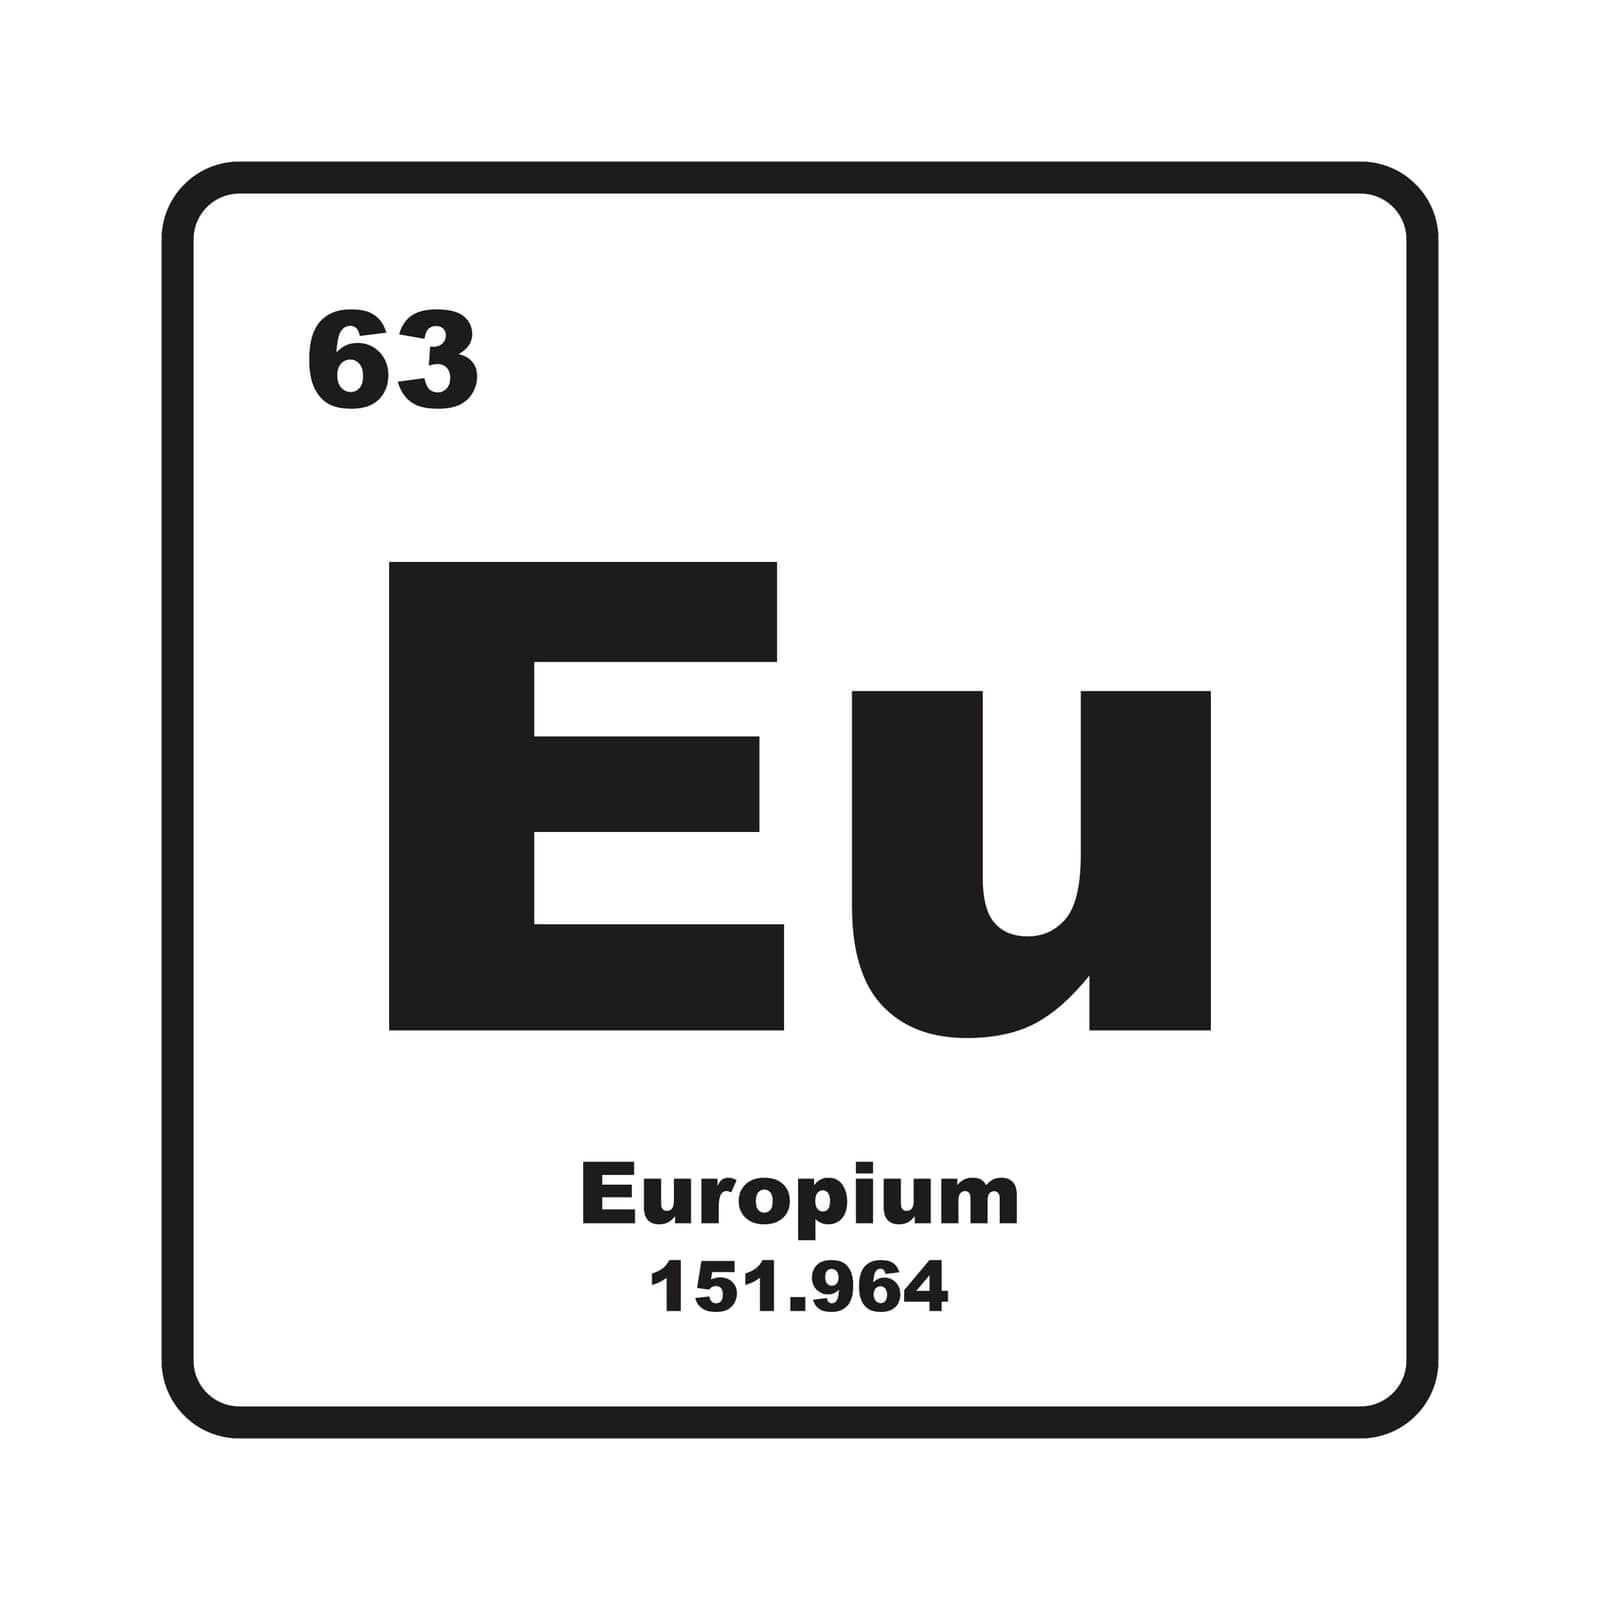 Europium icon, chemical element in the periodic table